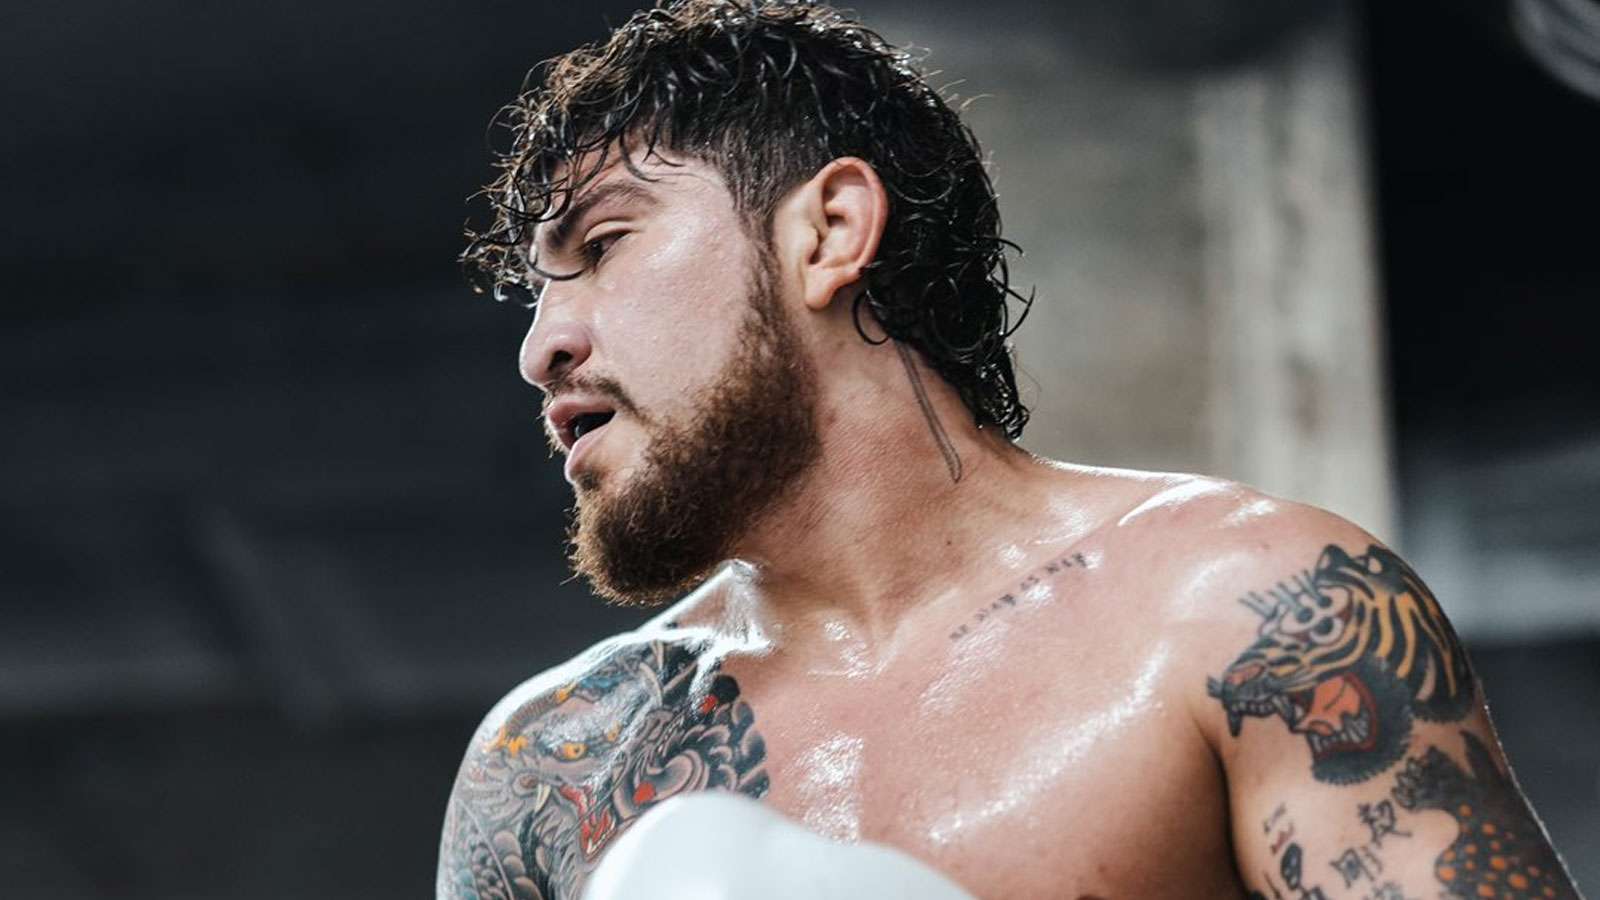 Dillon Danis training in gym wearing boxing gloves